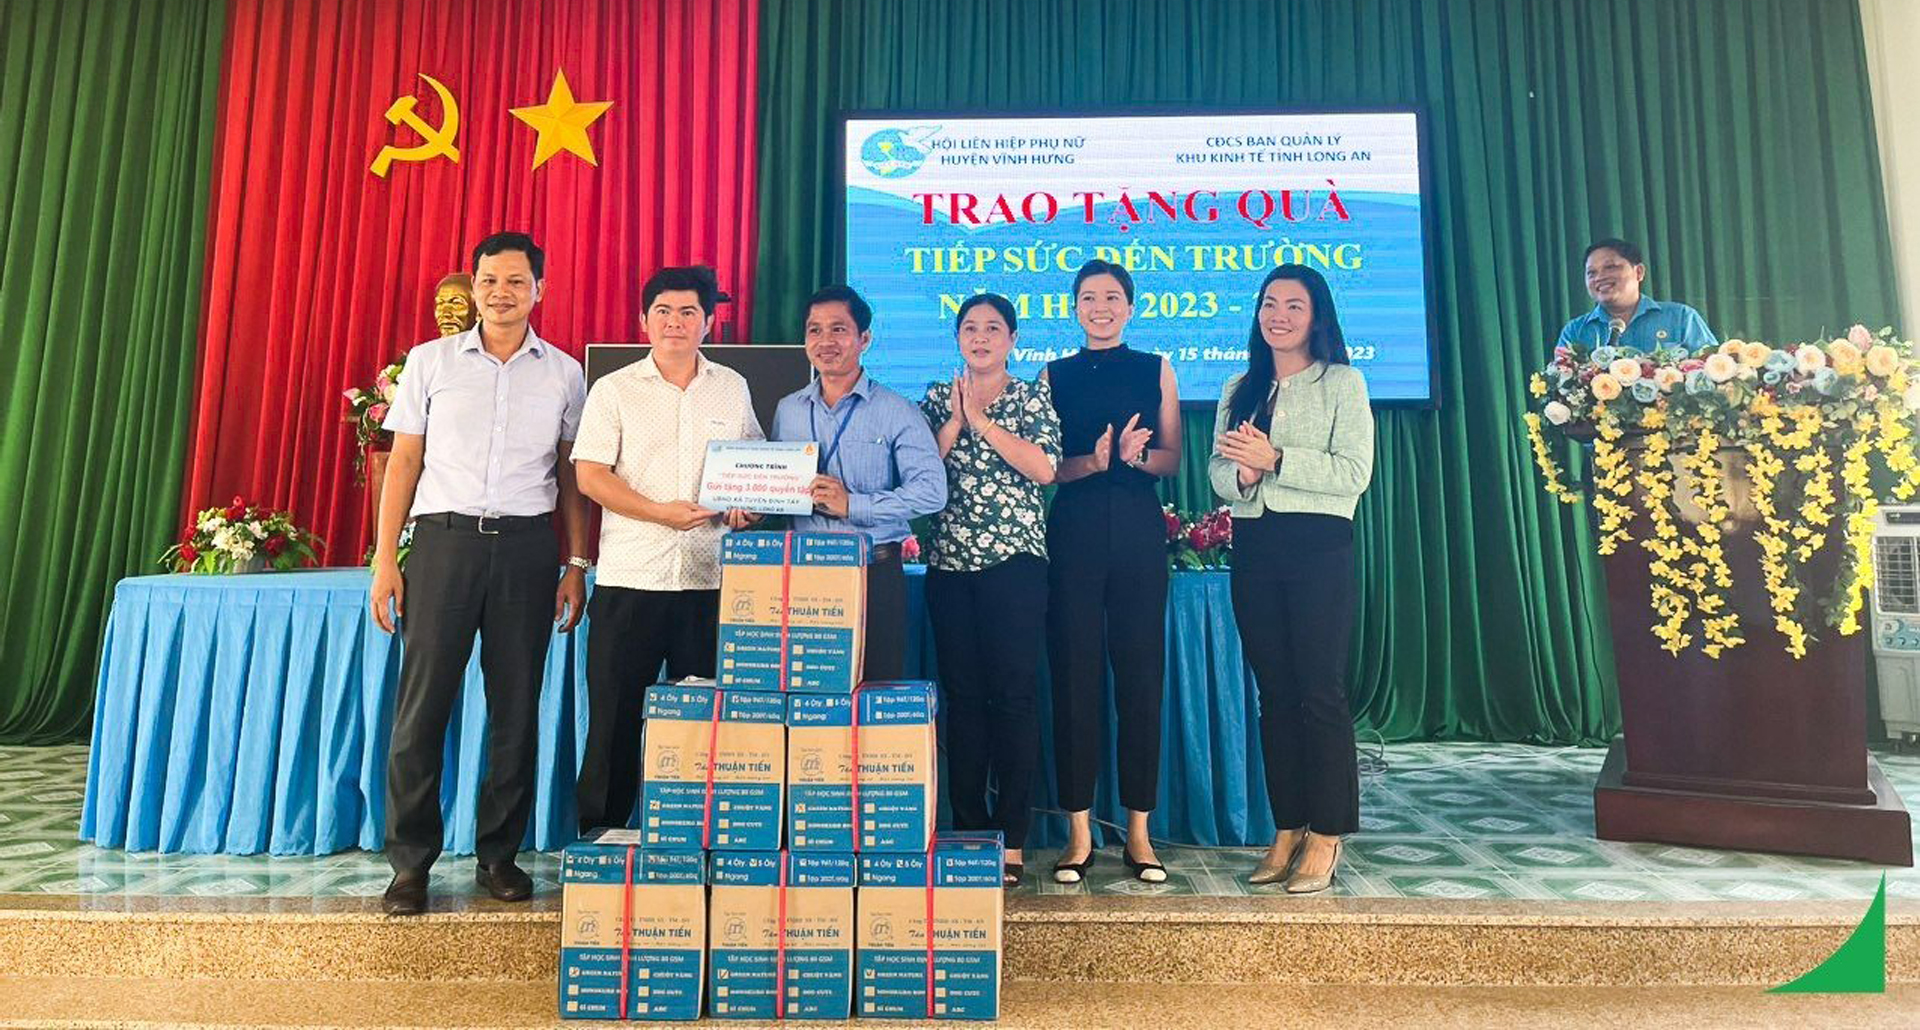 KCN Vietnam honored to be a part of the event “TIEP SUC DEN TRUONG” with Long An Economic Zone Authority – LAEZA